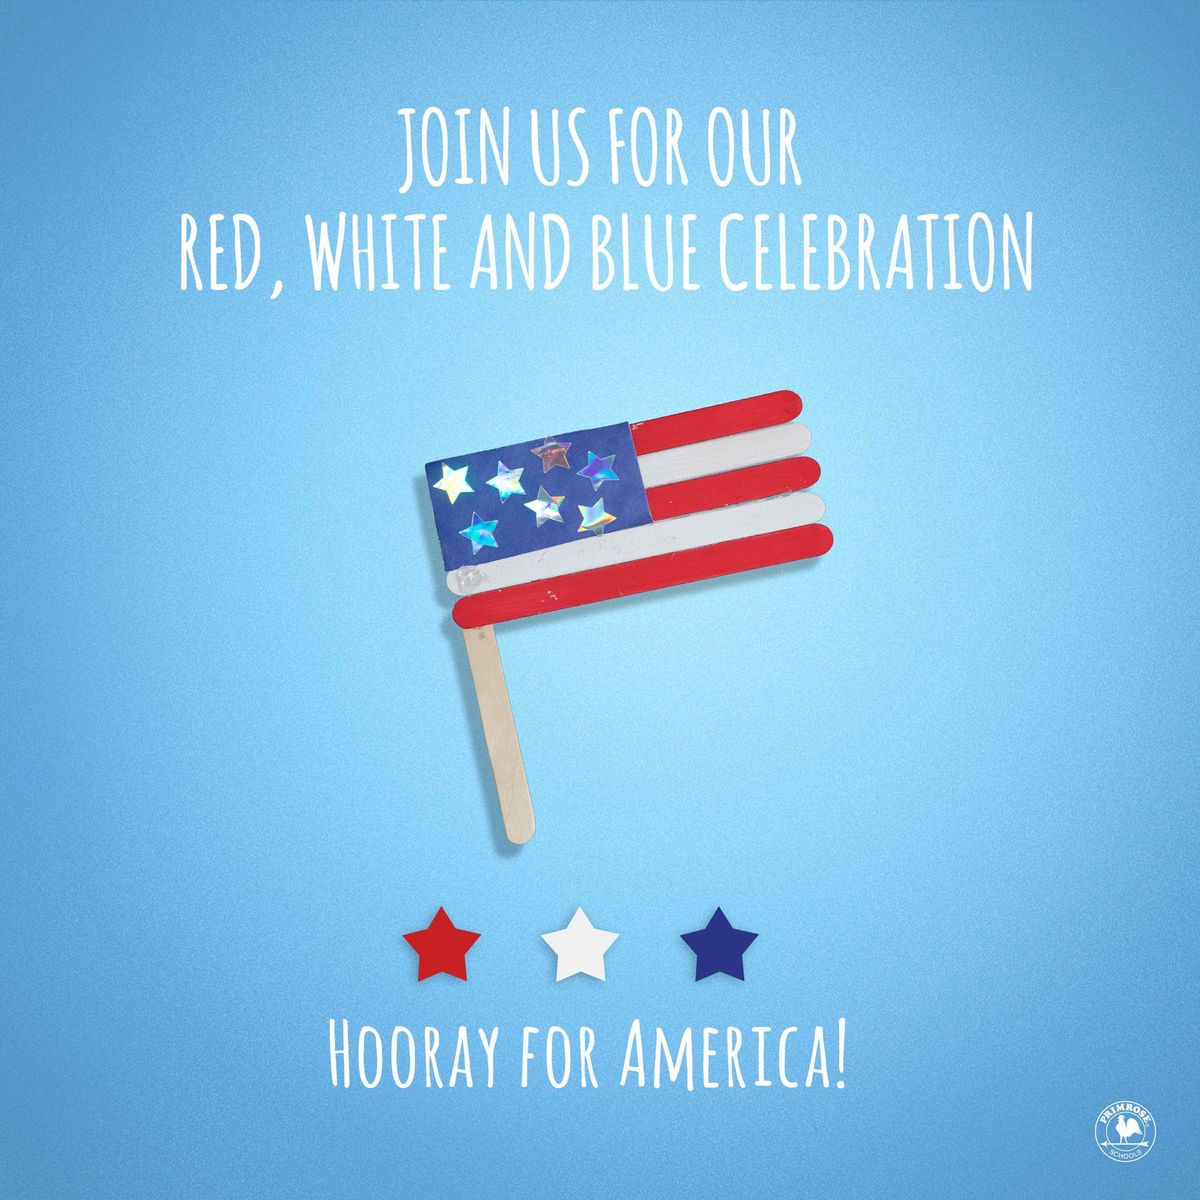 Red, White and Blue Celebration!